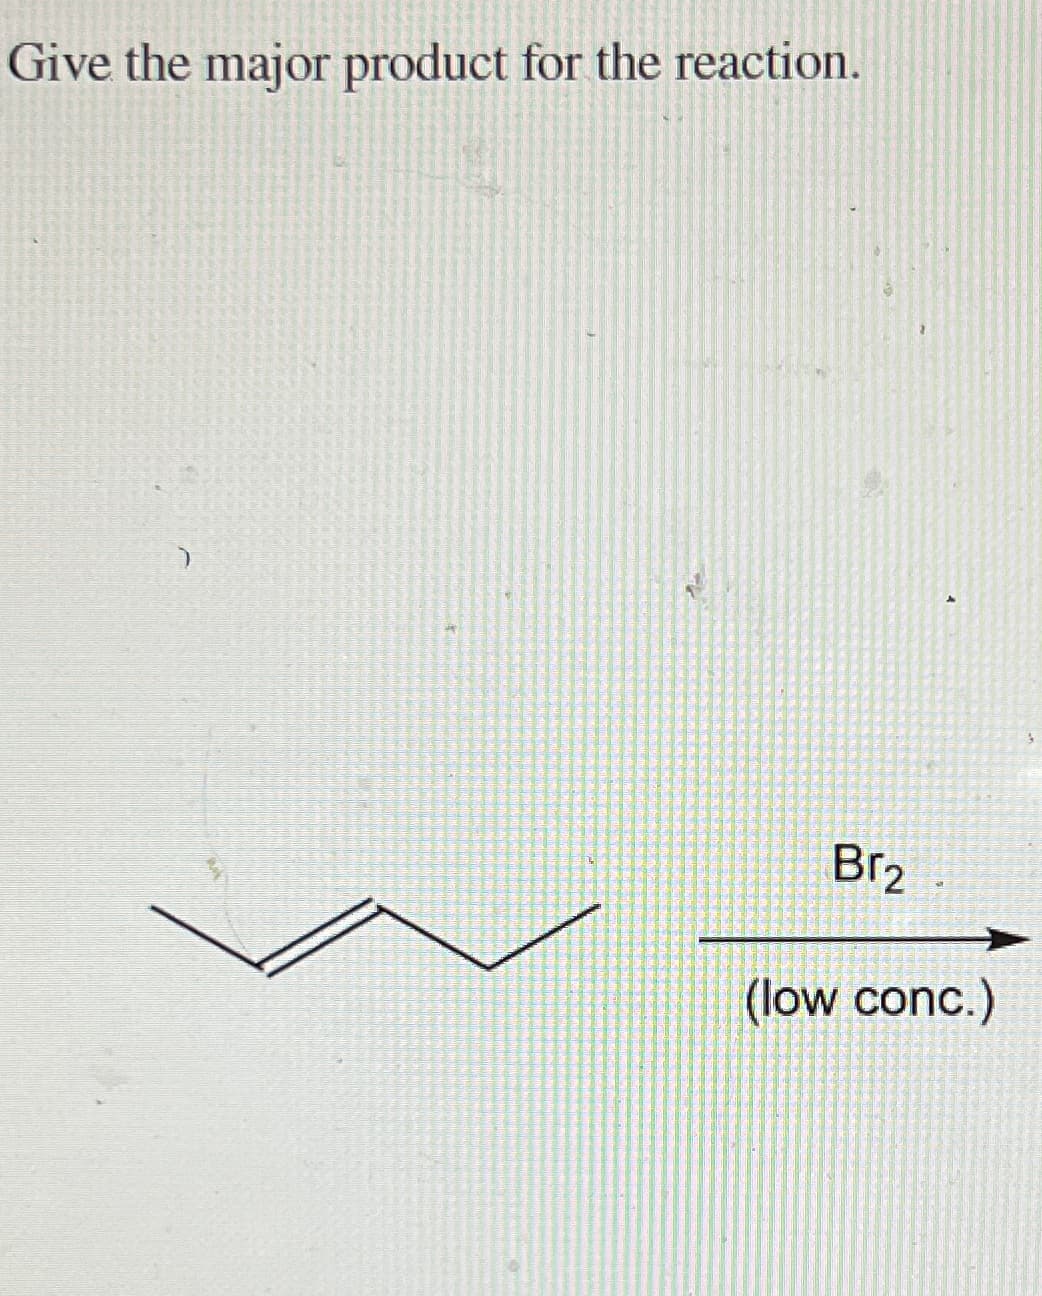 Give the major product for the reaction.
า
Br2
(low conc.)